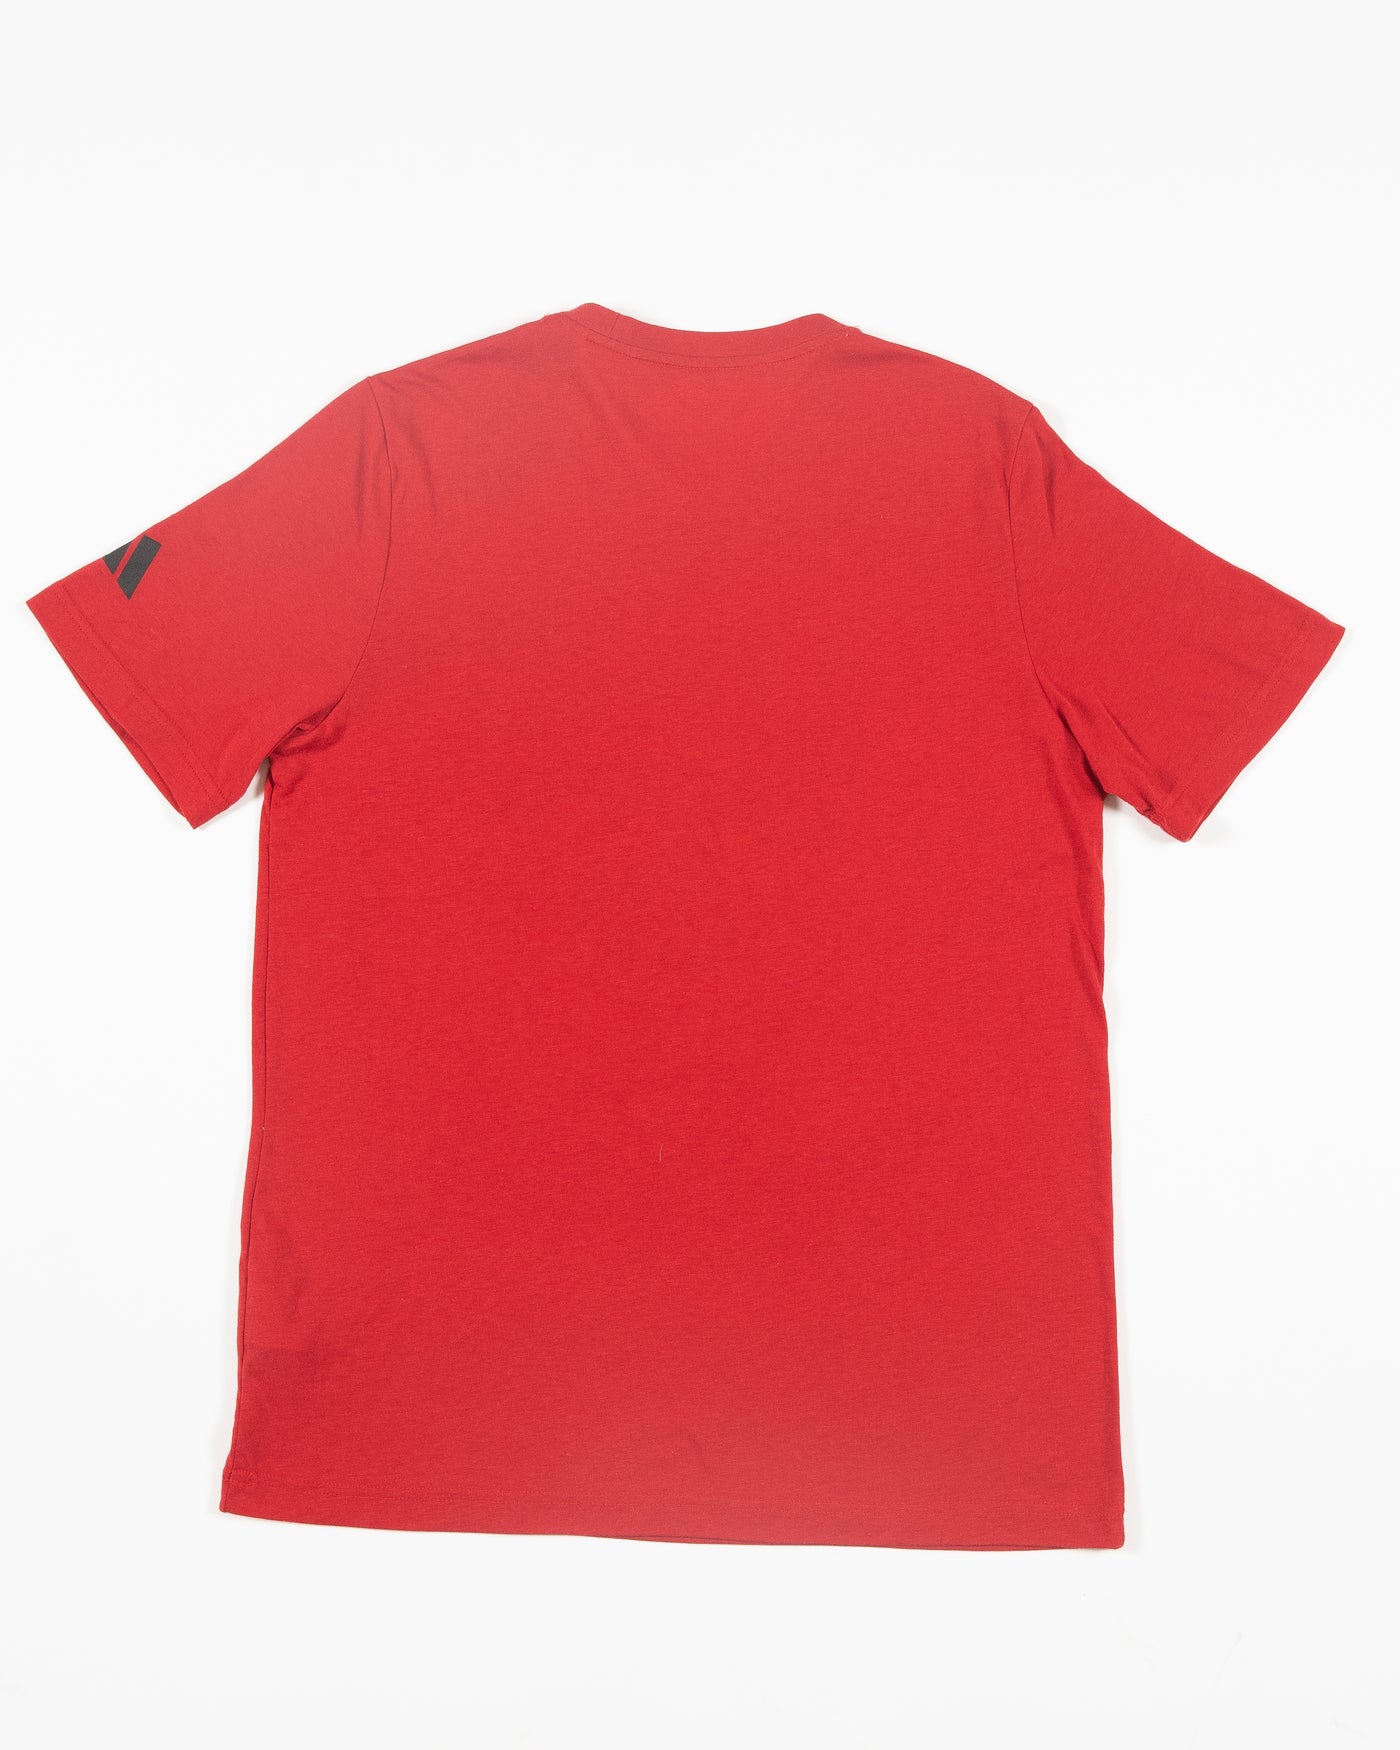 adidas red tee with Chicago Blackhawks word graphic and primary logo on front chest - back lay flat